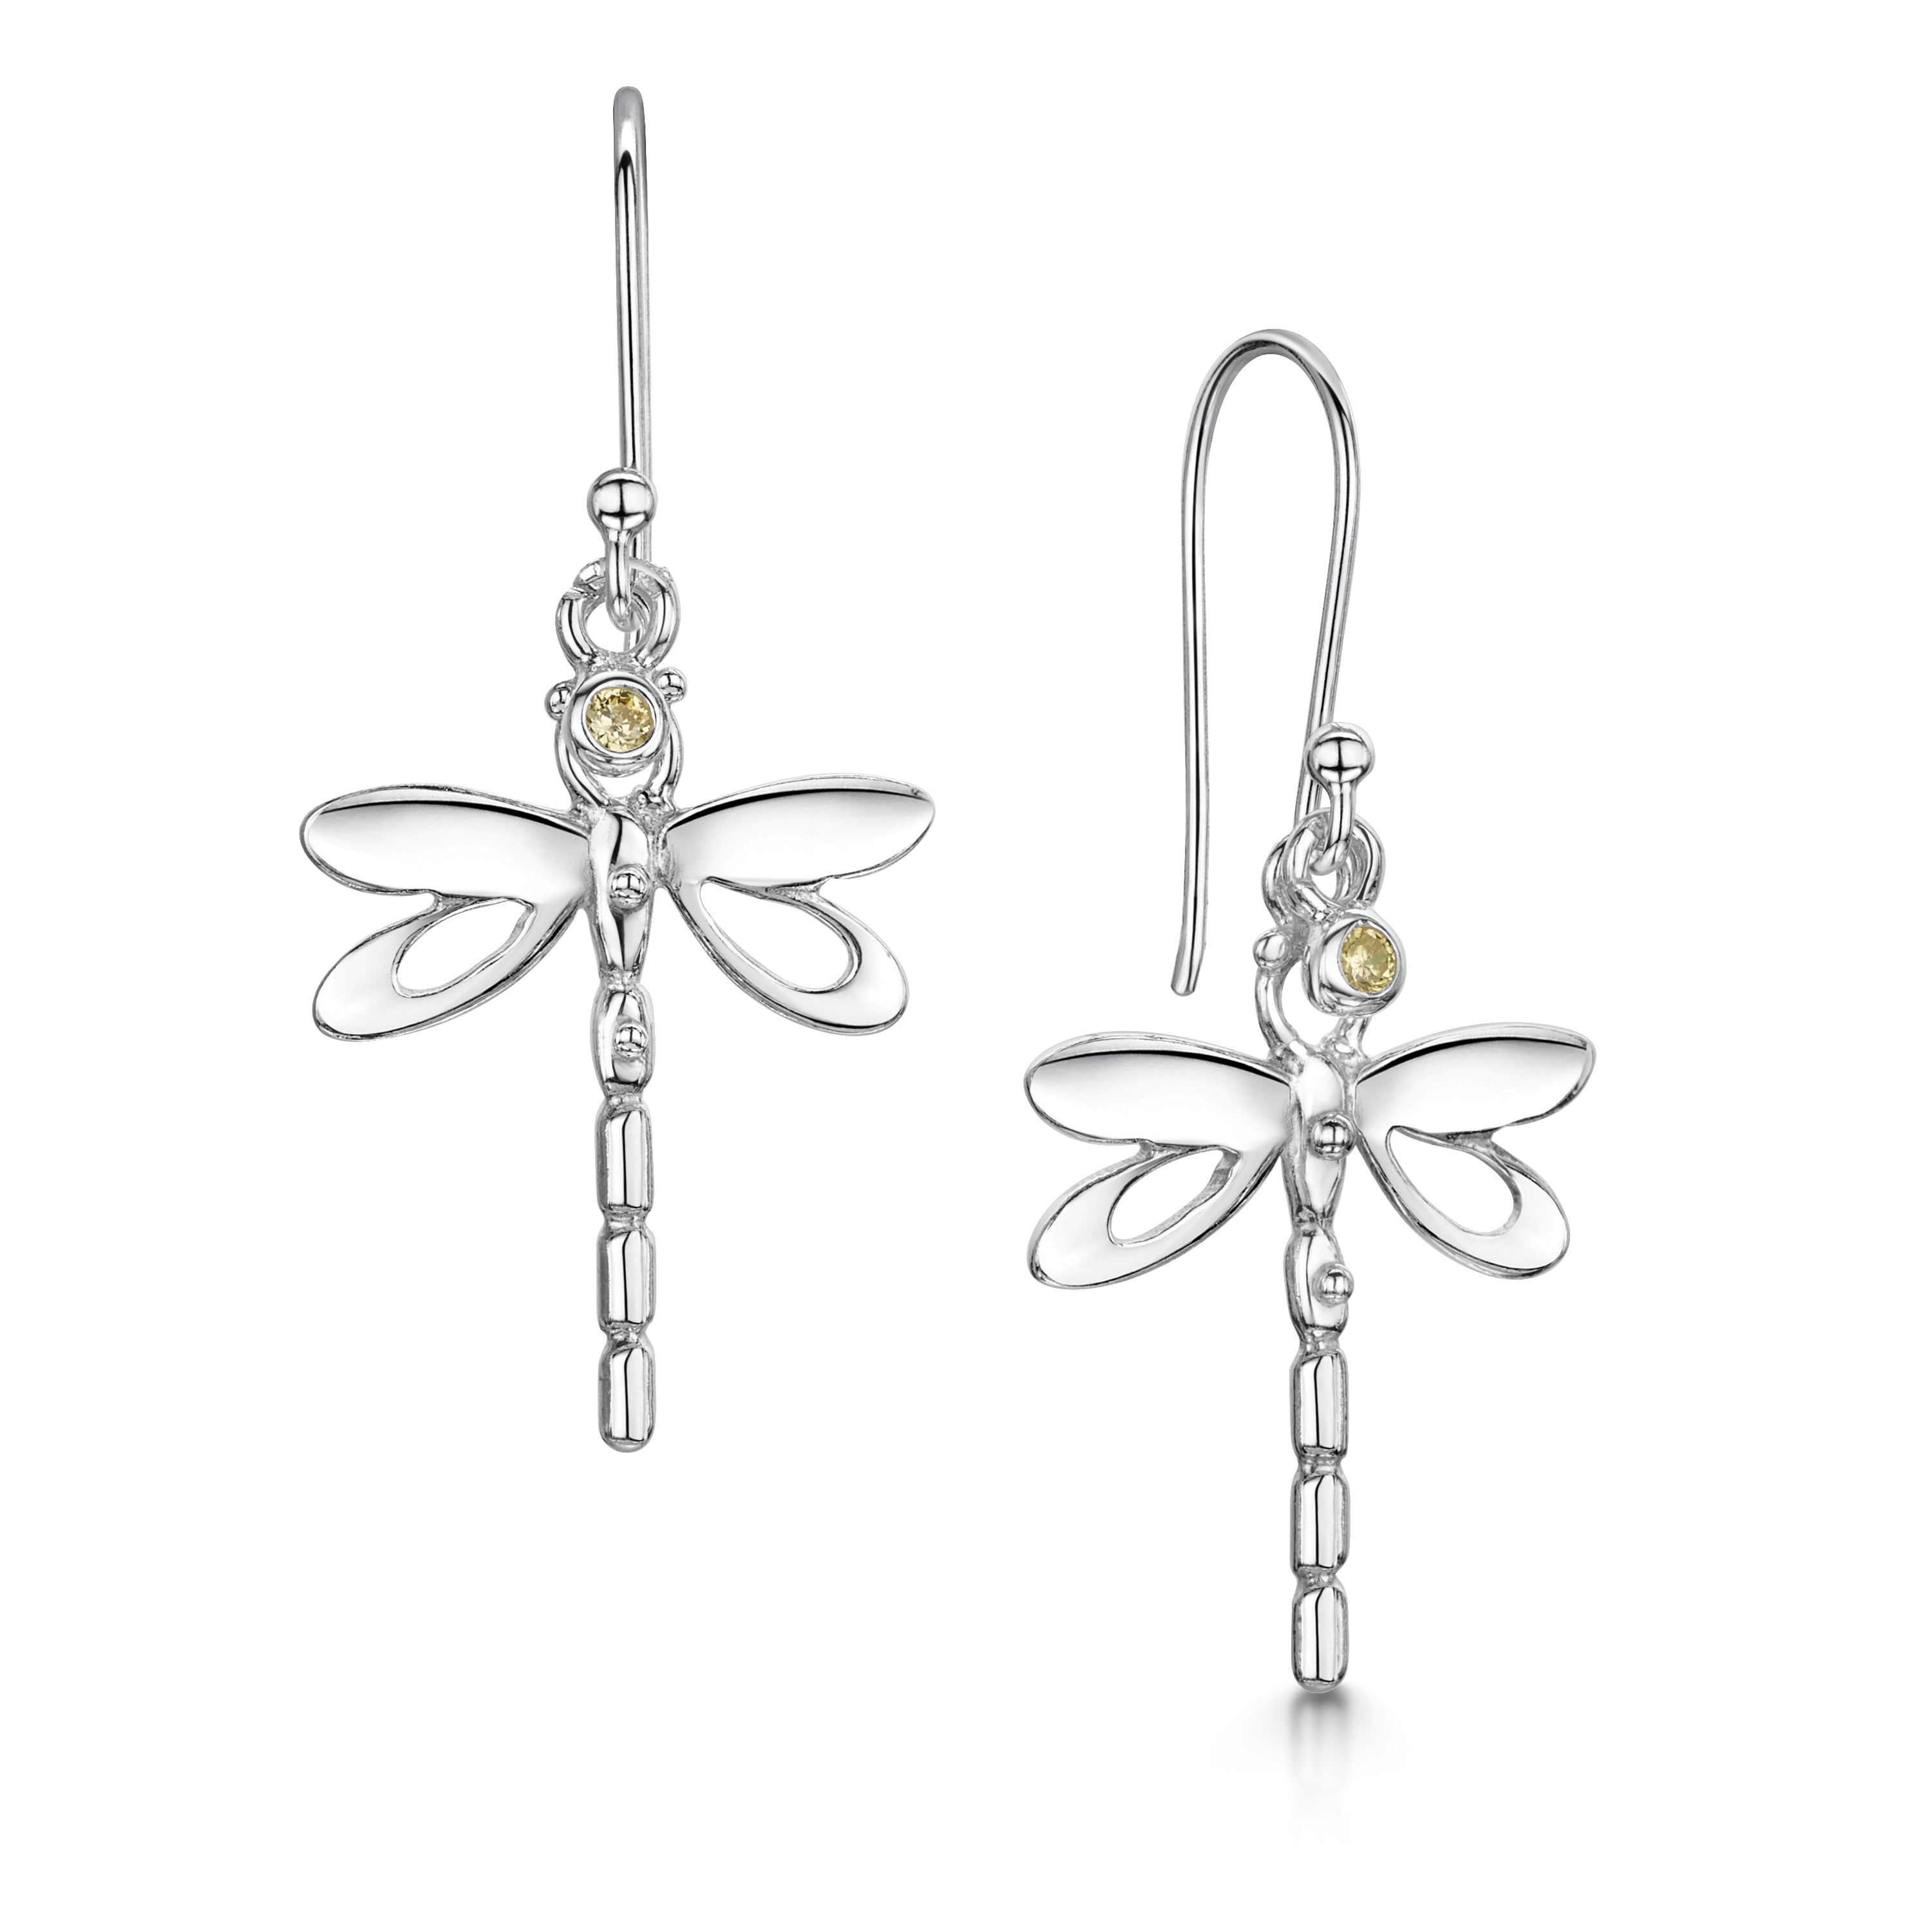 Dragonfly silver drop earrings with Amber Crystal| Glenna Jewellery Scotland